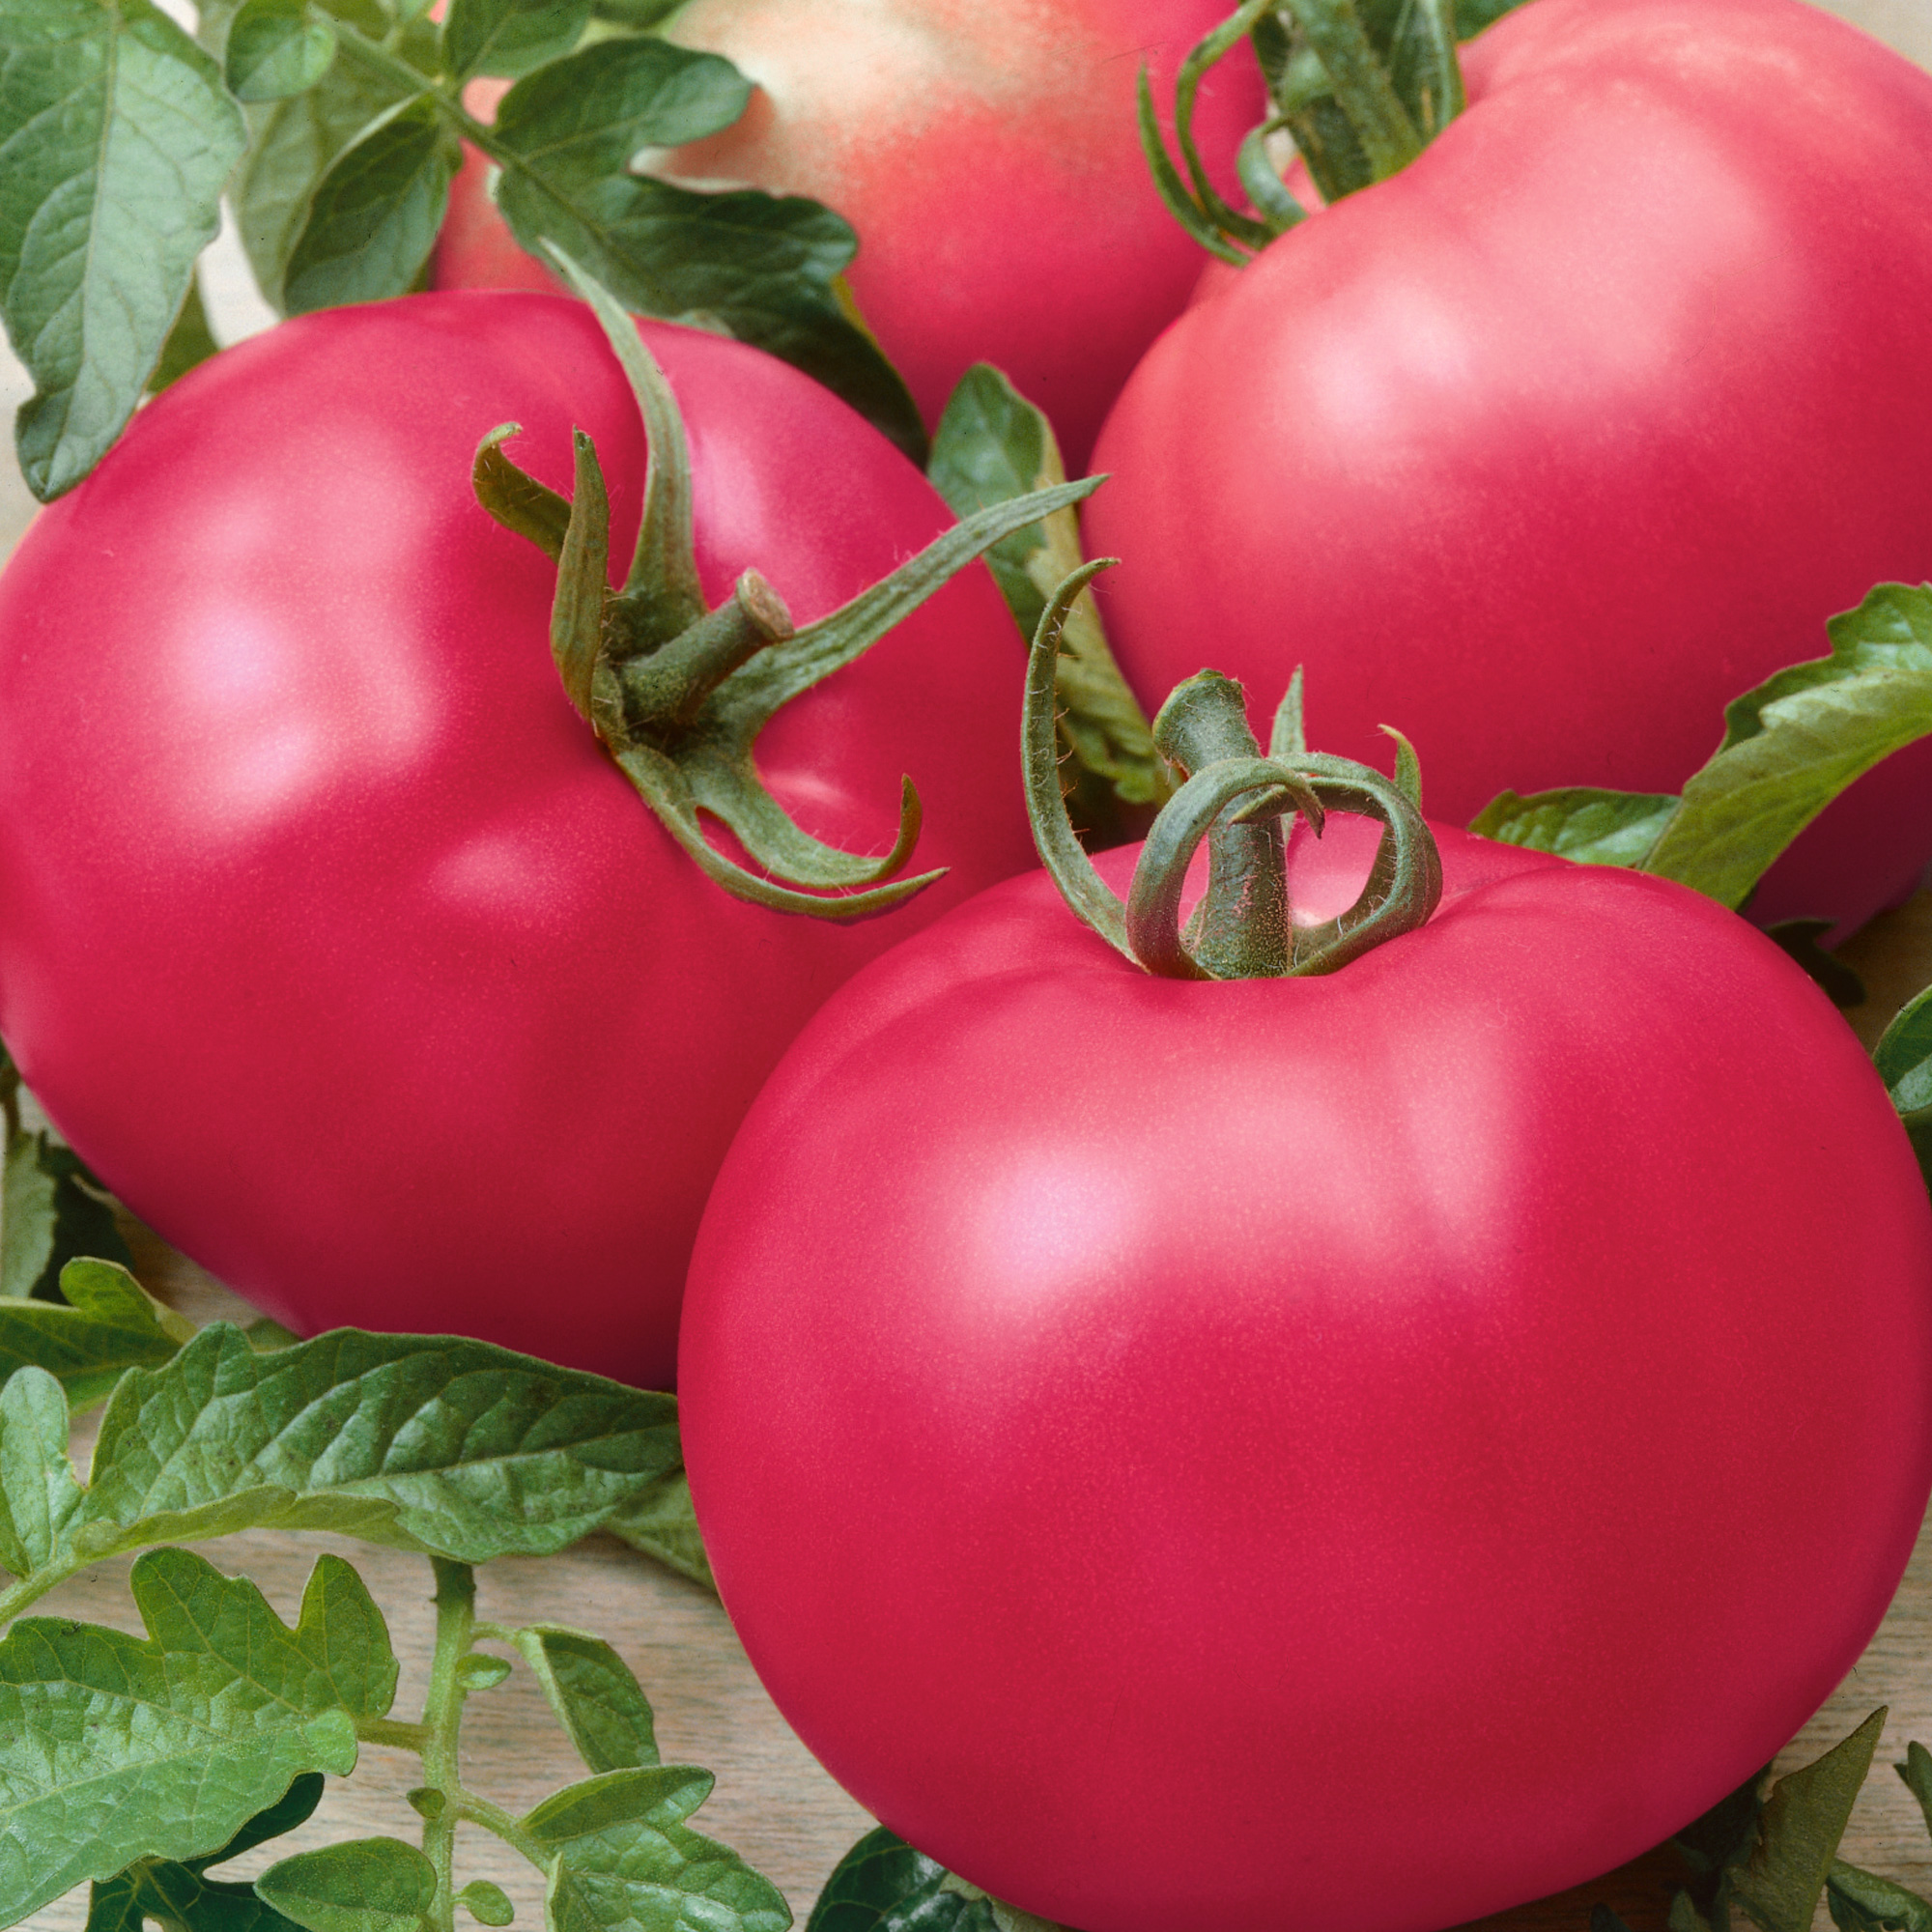 Chef's Choice Pink F1 Hybrid AAS Tomato Seeds - 0.25 Oz ~1700 Seeds - Non-GMO, F1 Hybrid - Vegetable Garden - Lycopersicon esculentum - image 1 of 1